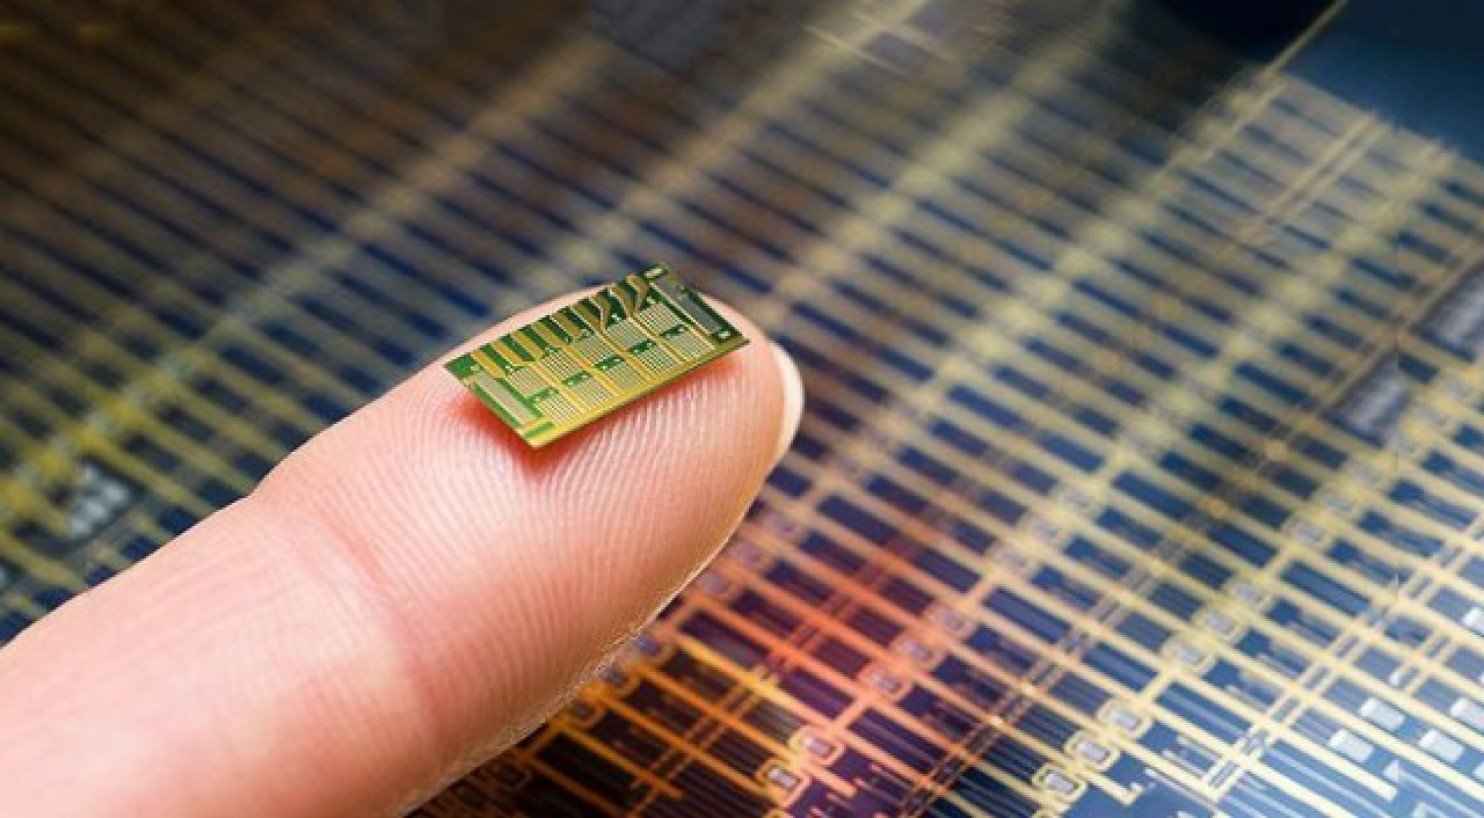 This remote-controlled implant could provide women contraception for up to 16 years. (MicroCHIPS Biotech)